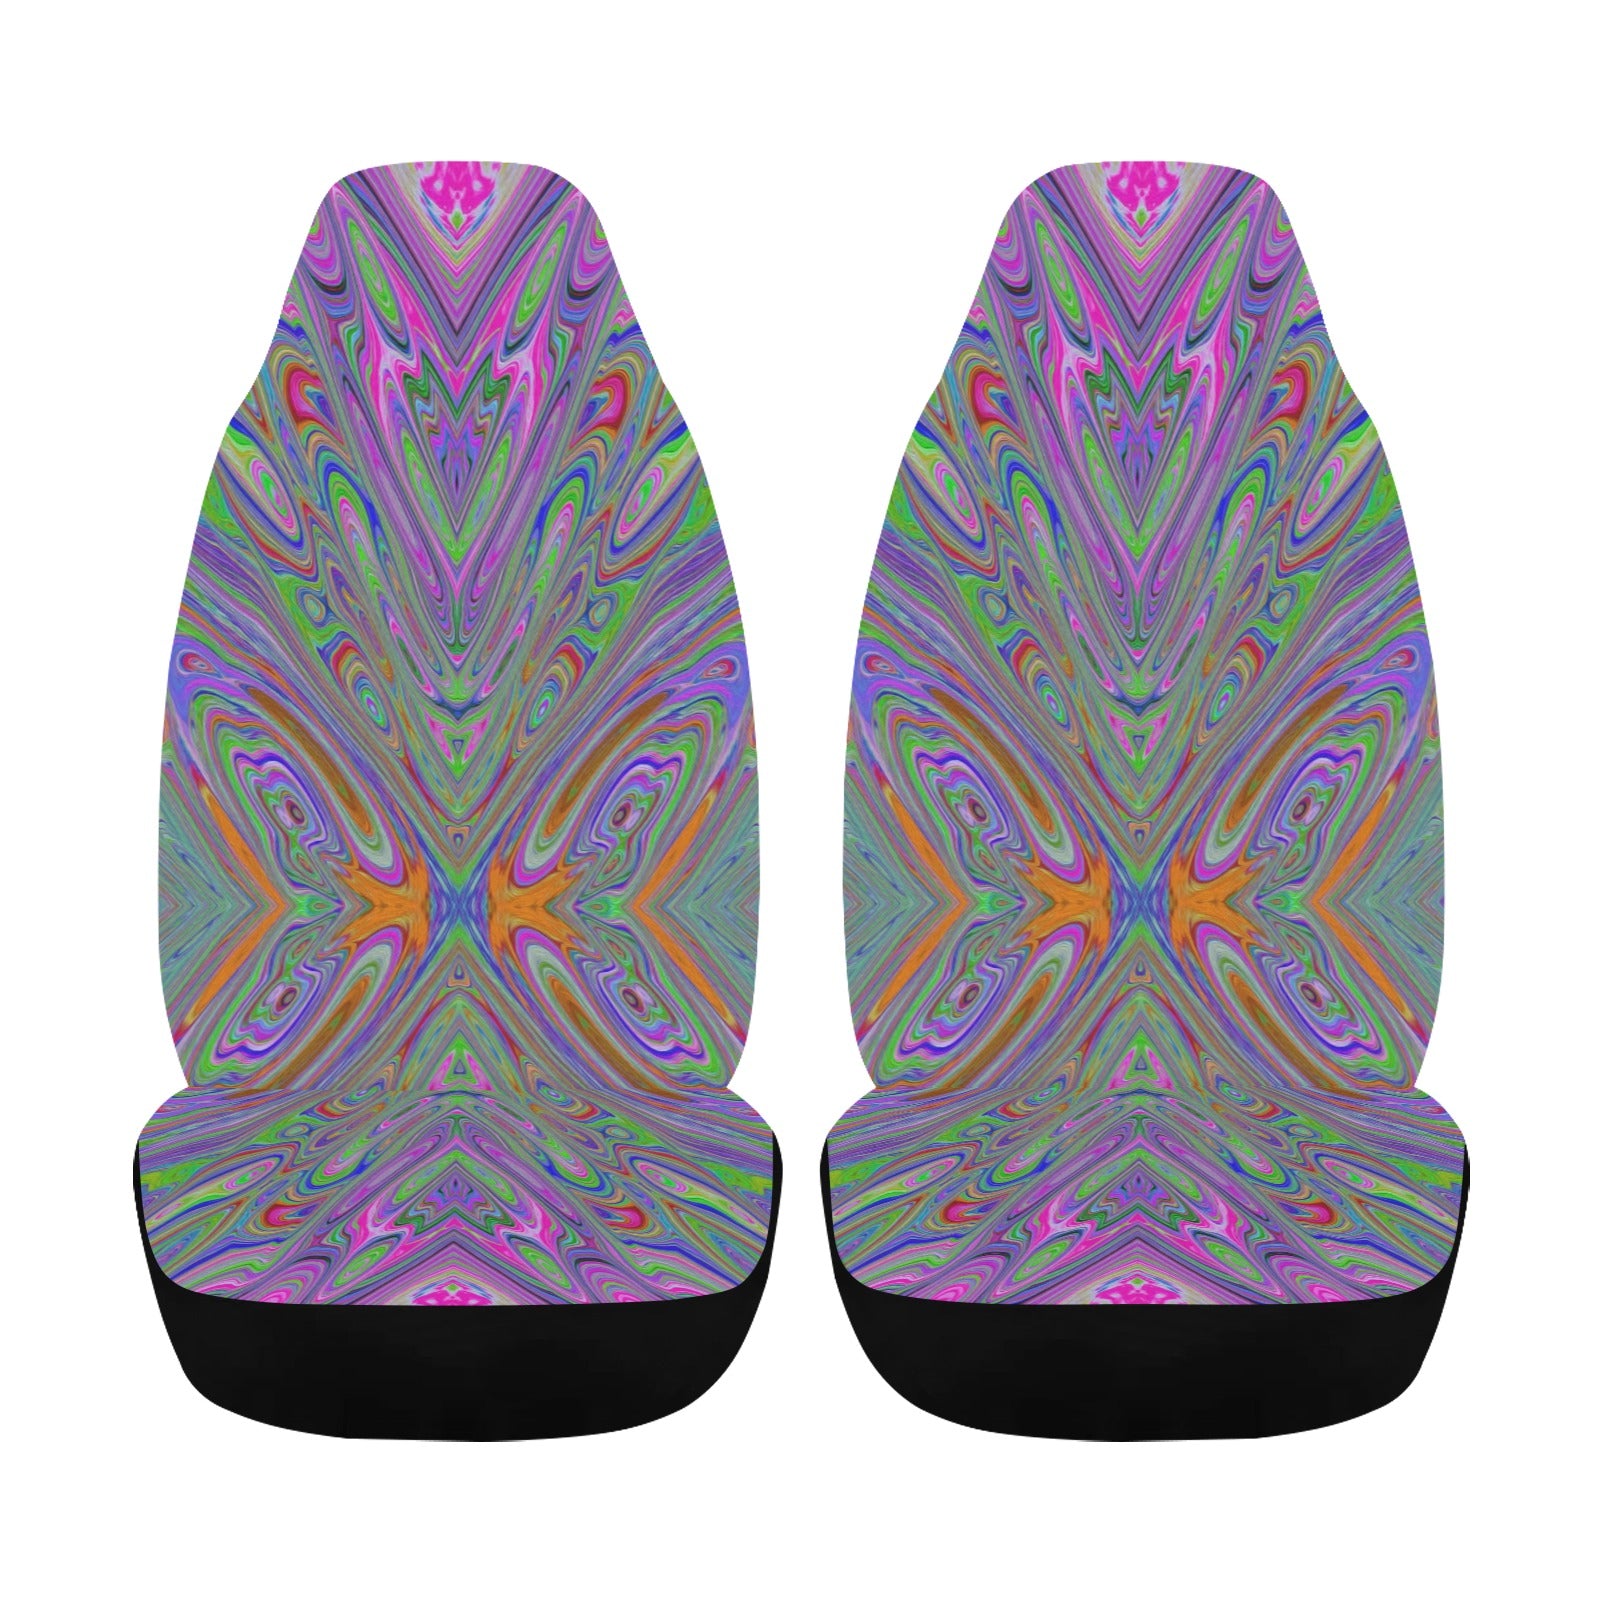 Car Seat Covers, Abstract Trippy Purple, Orange and Lime Green Butterfly